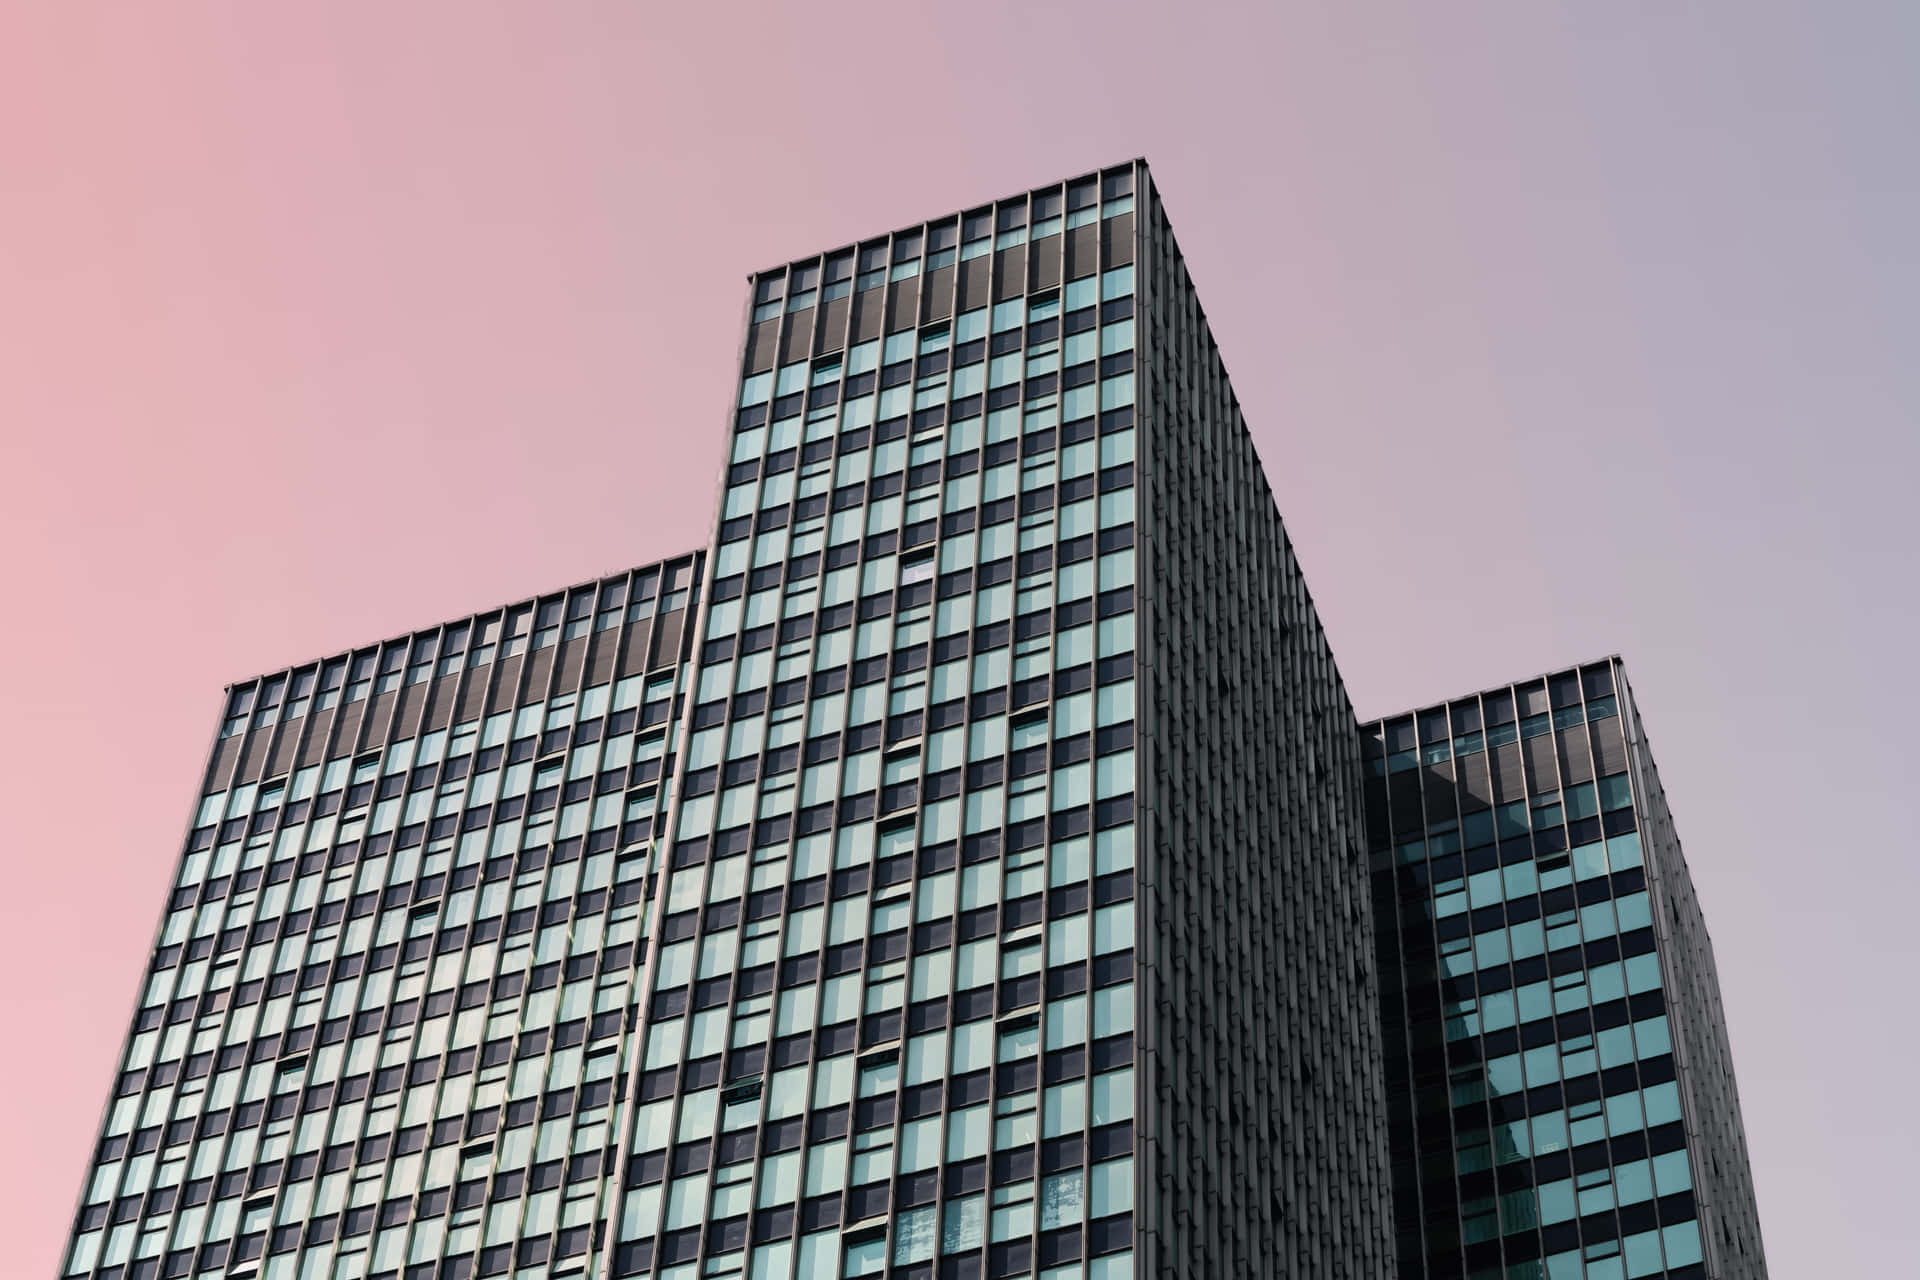 A Building With Windows Against A Pink Sky